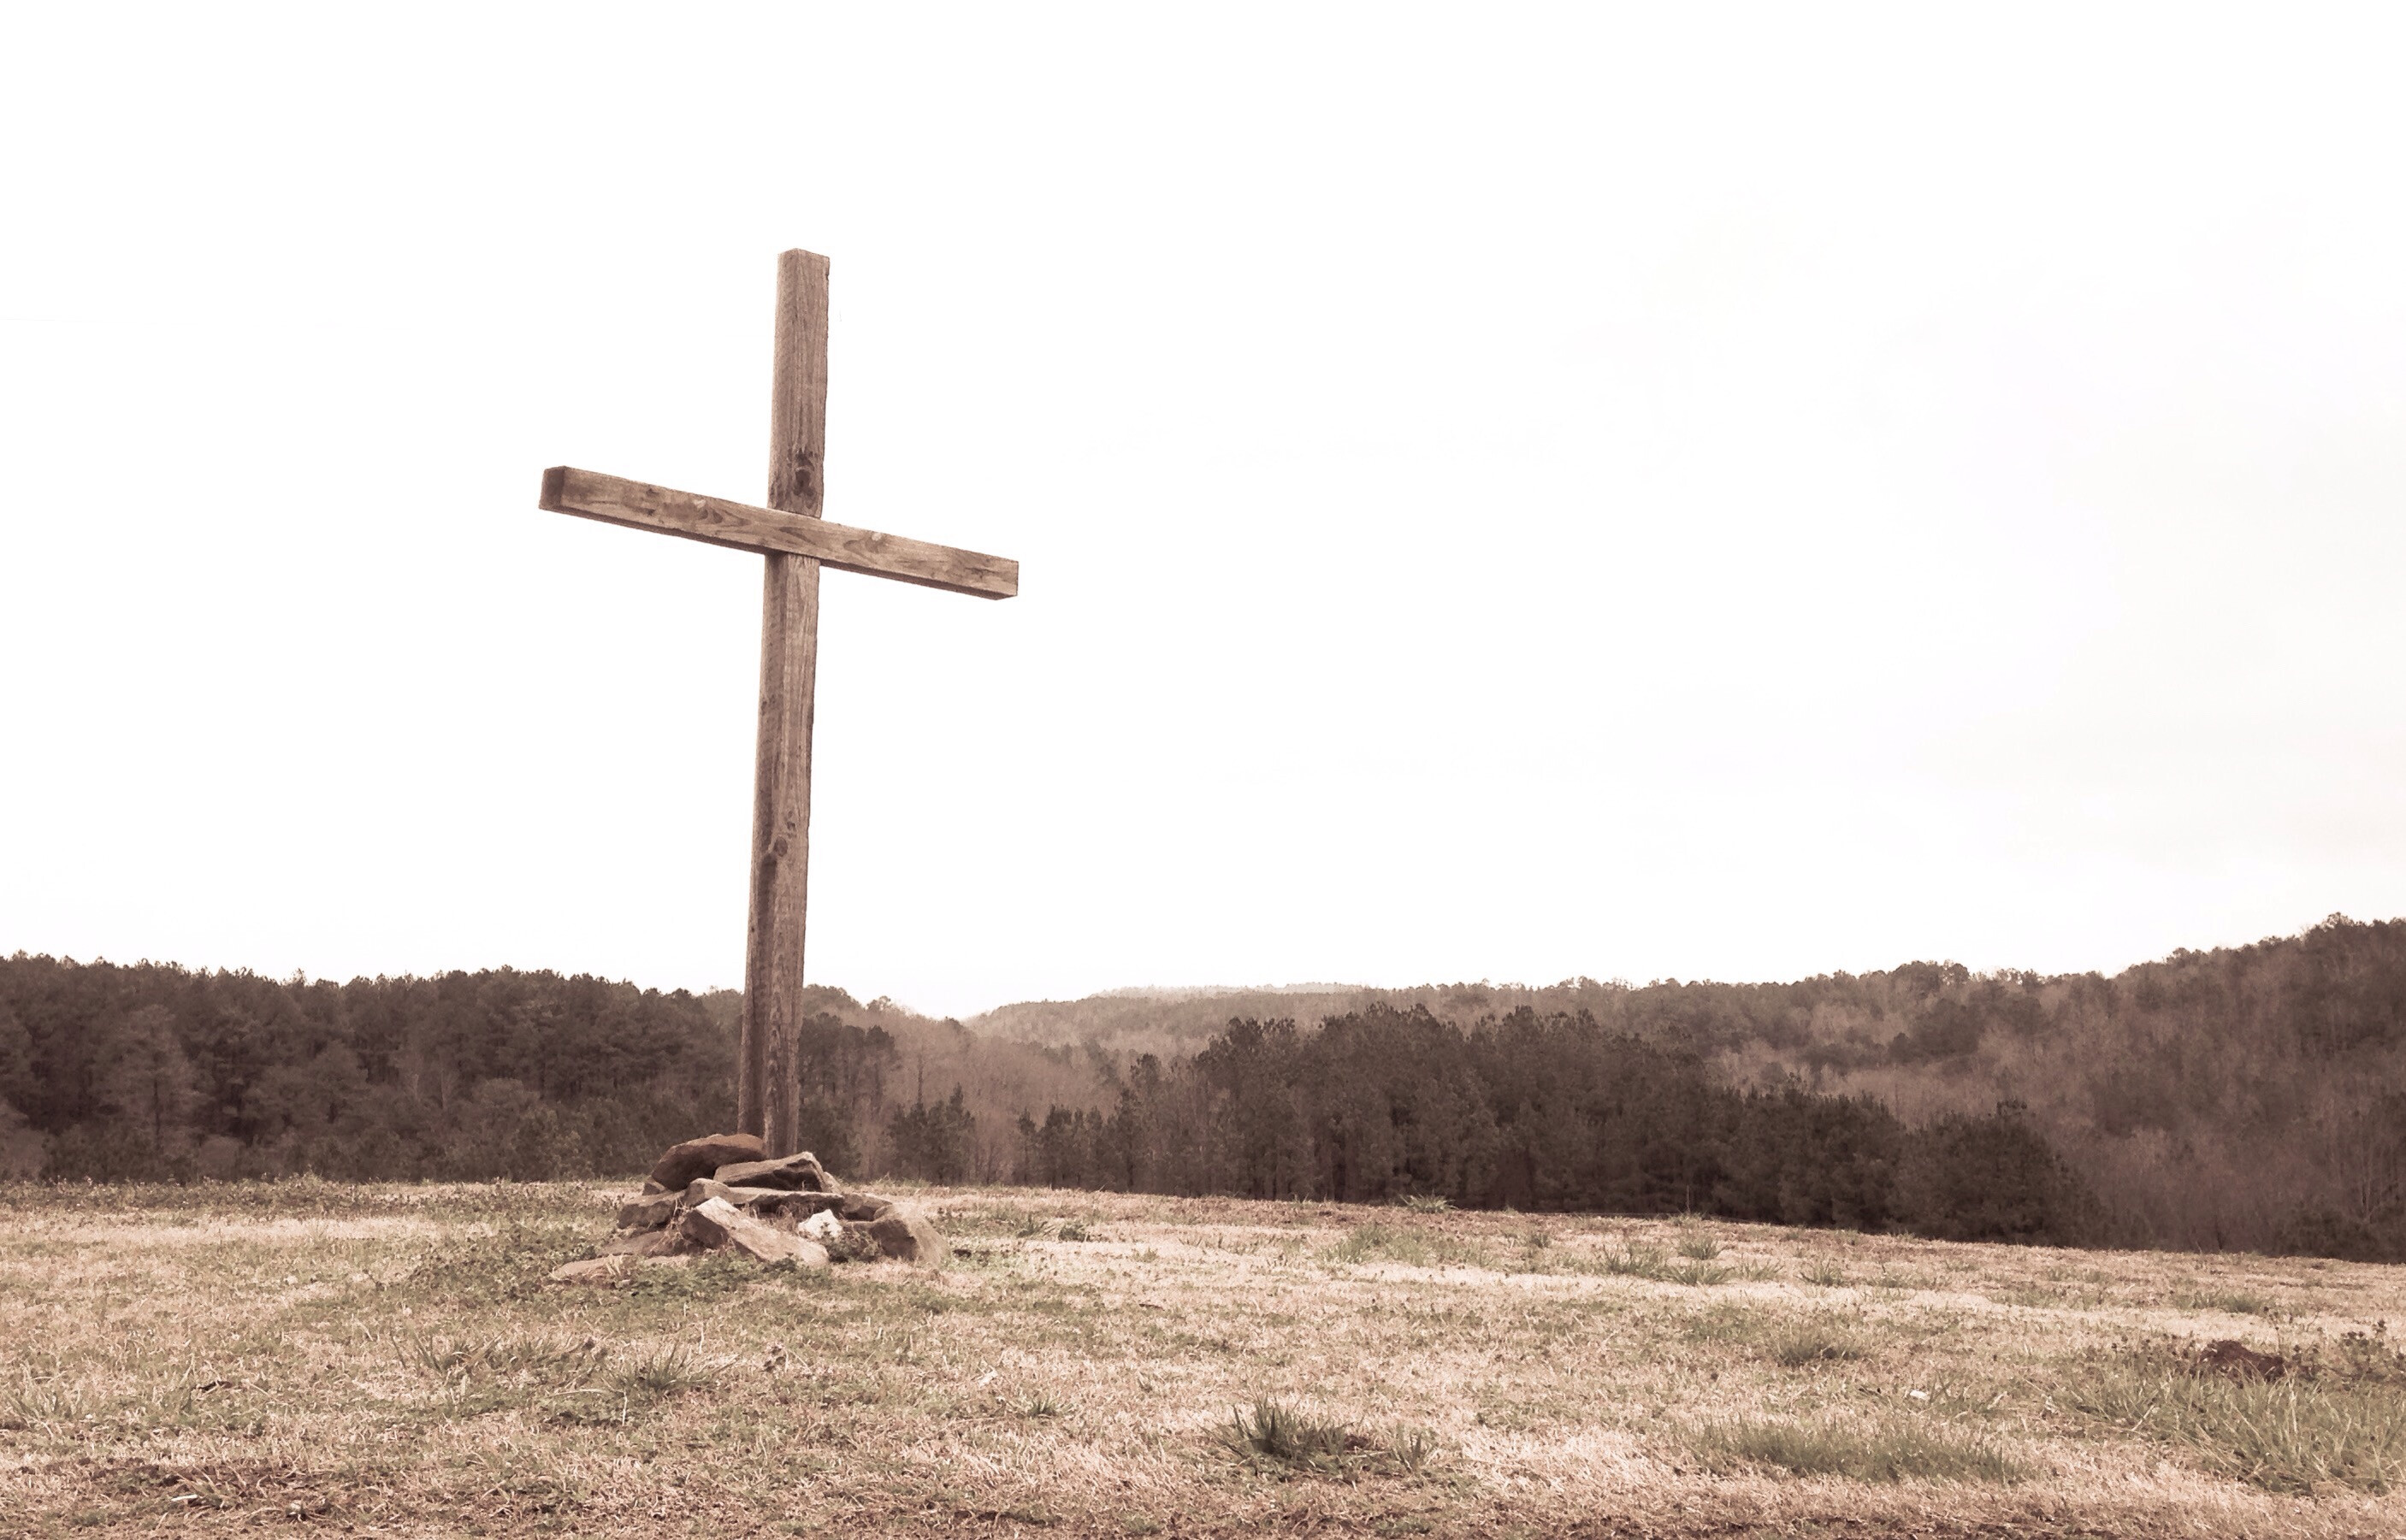 Easter Reflections - Thoughts from Isaiah 53